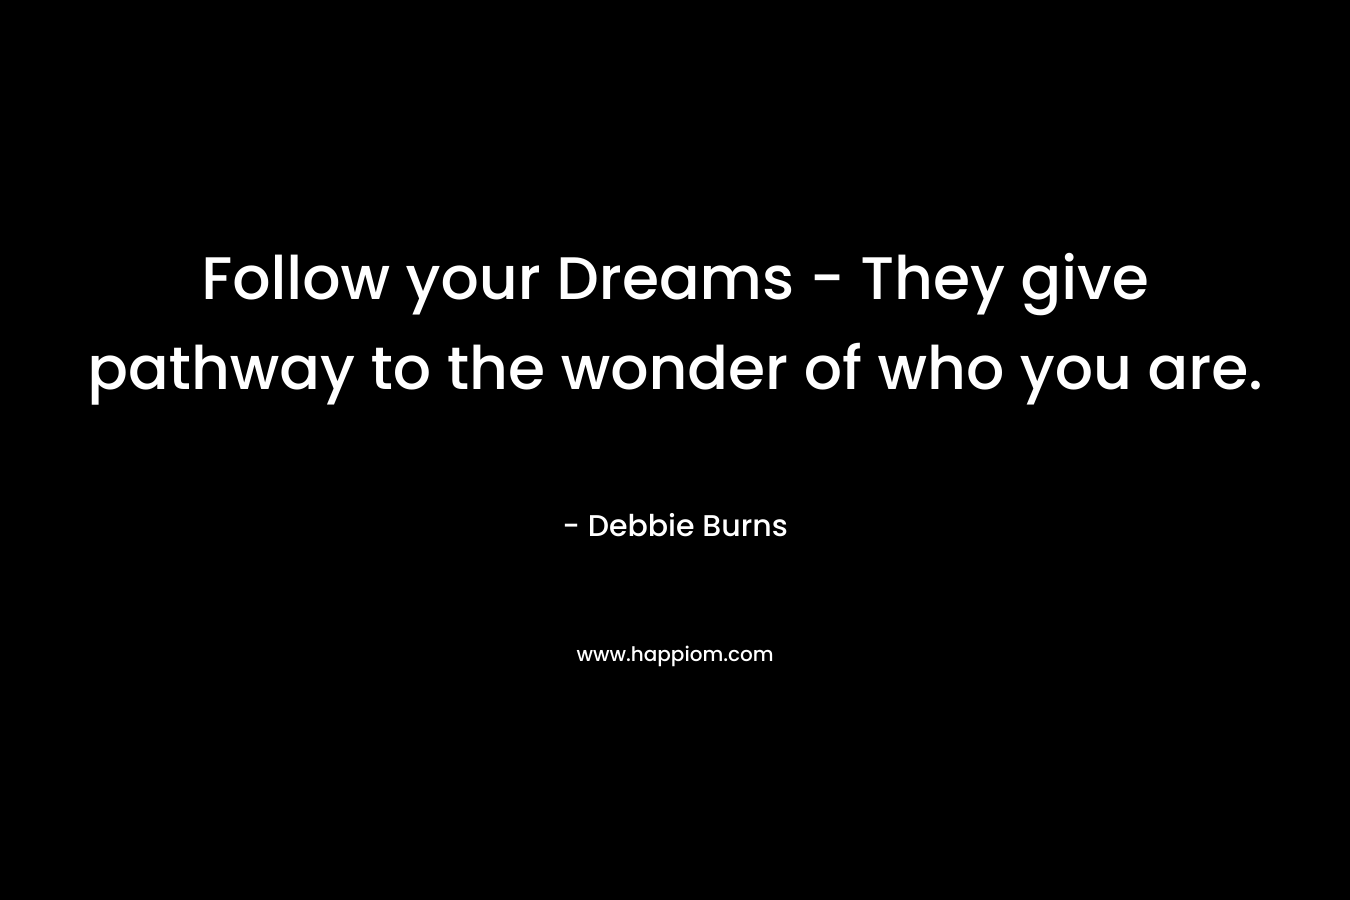 Follow your Dreams – They give pathway to the wonder of who you are. – Debbie Burns